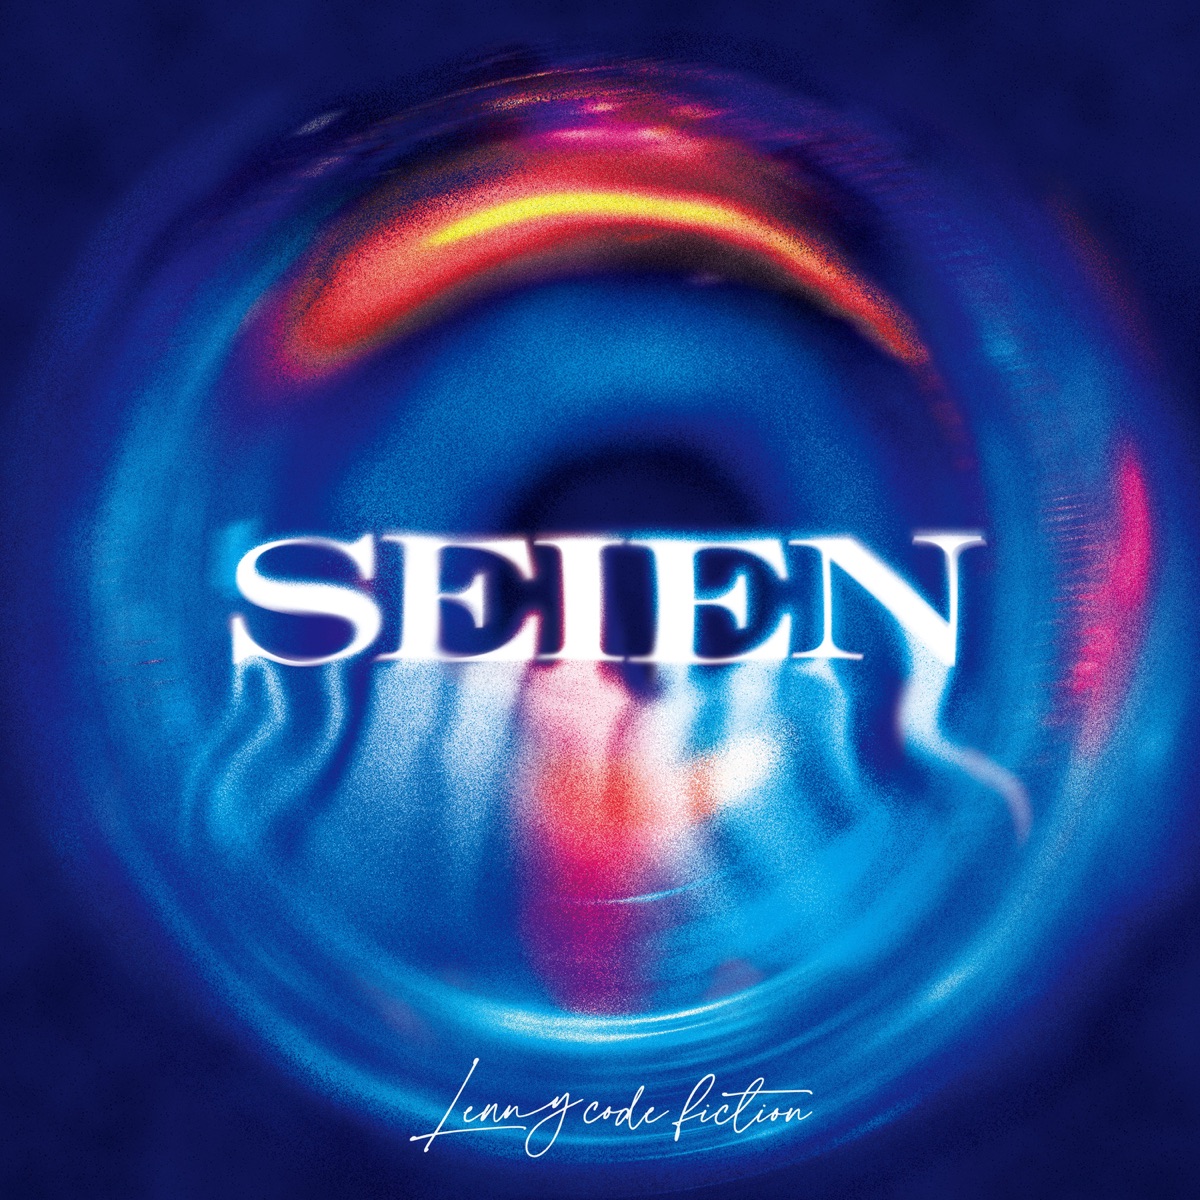 Cover art for『Lenny code fiction - SEIEN』from the release『SEIEN』